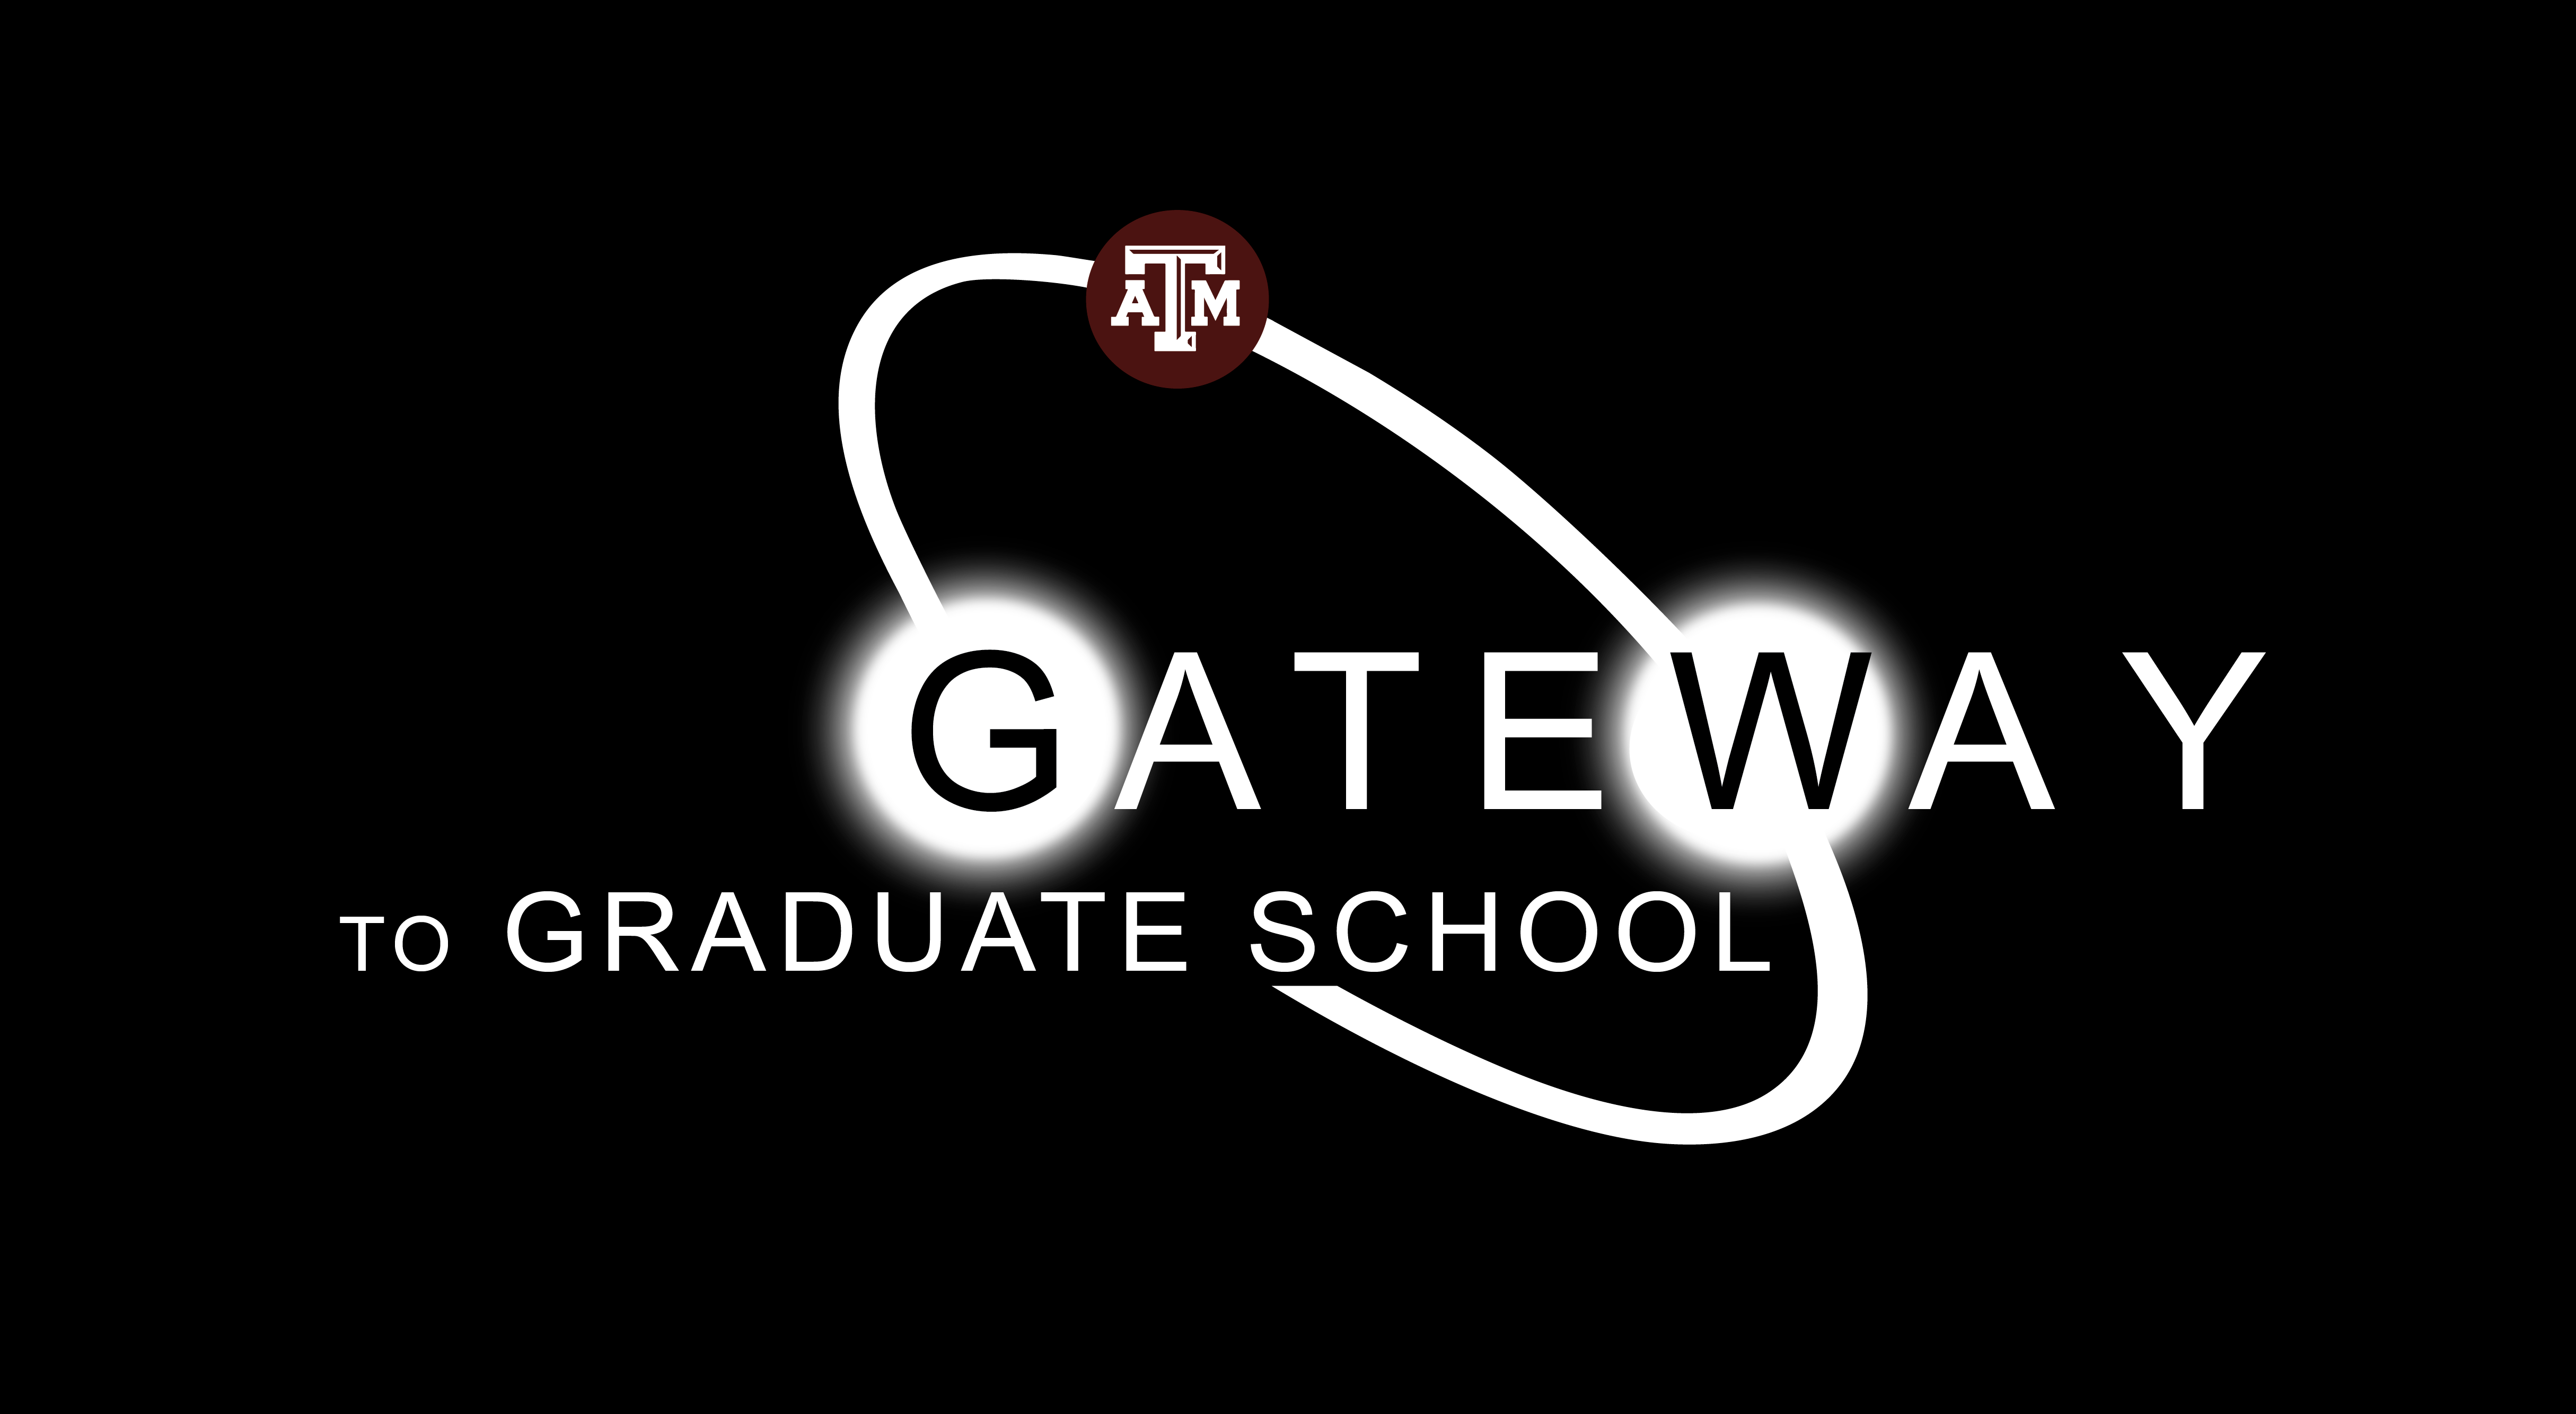 An image of the Gateway to Graduate School logo, created by Malu.